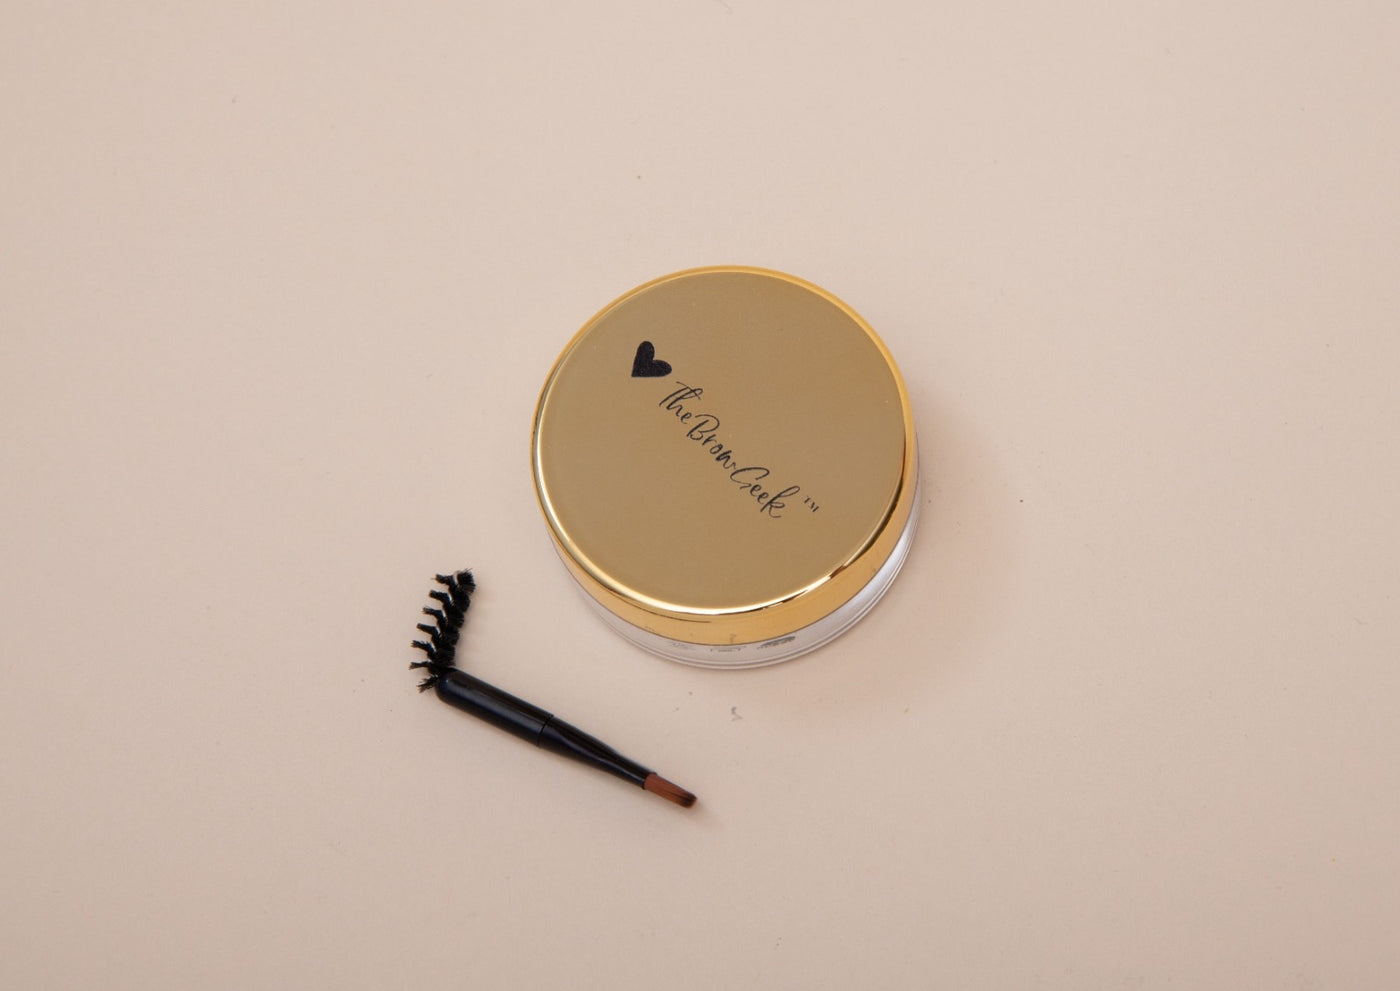 Brow Lifting Jelly - retail size 8g